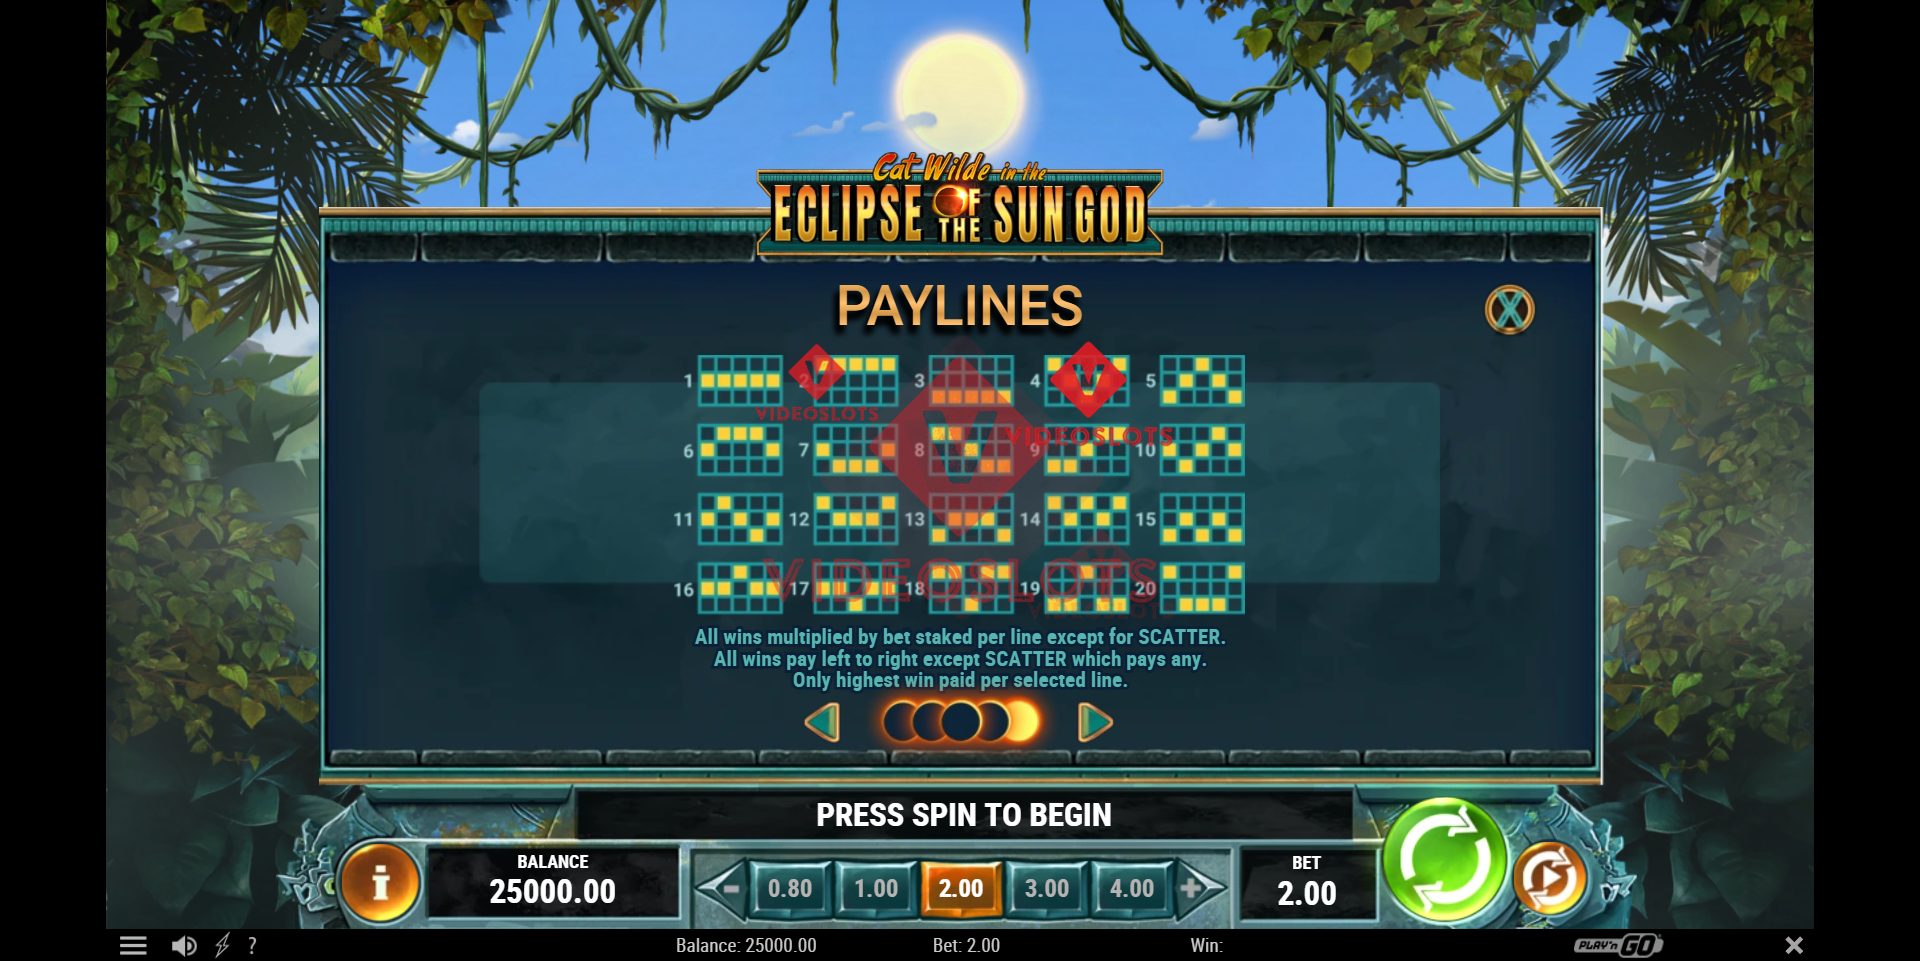 Pay Table for Cat Wilde in the Eclipse of the Sun God slot from Play'n Go